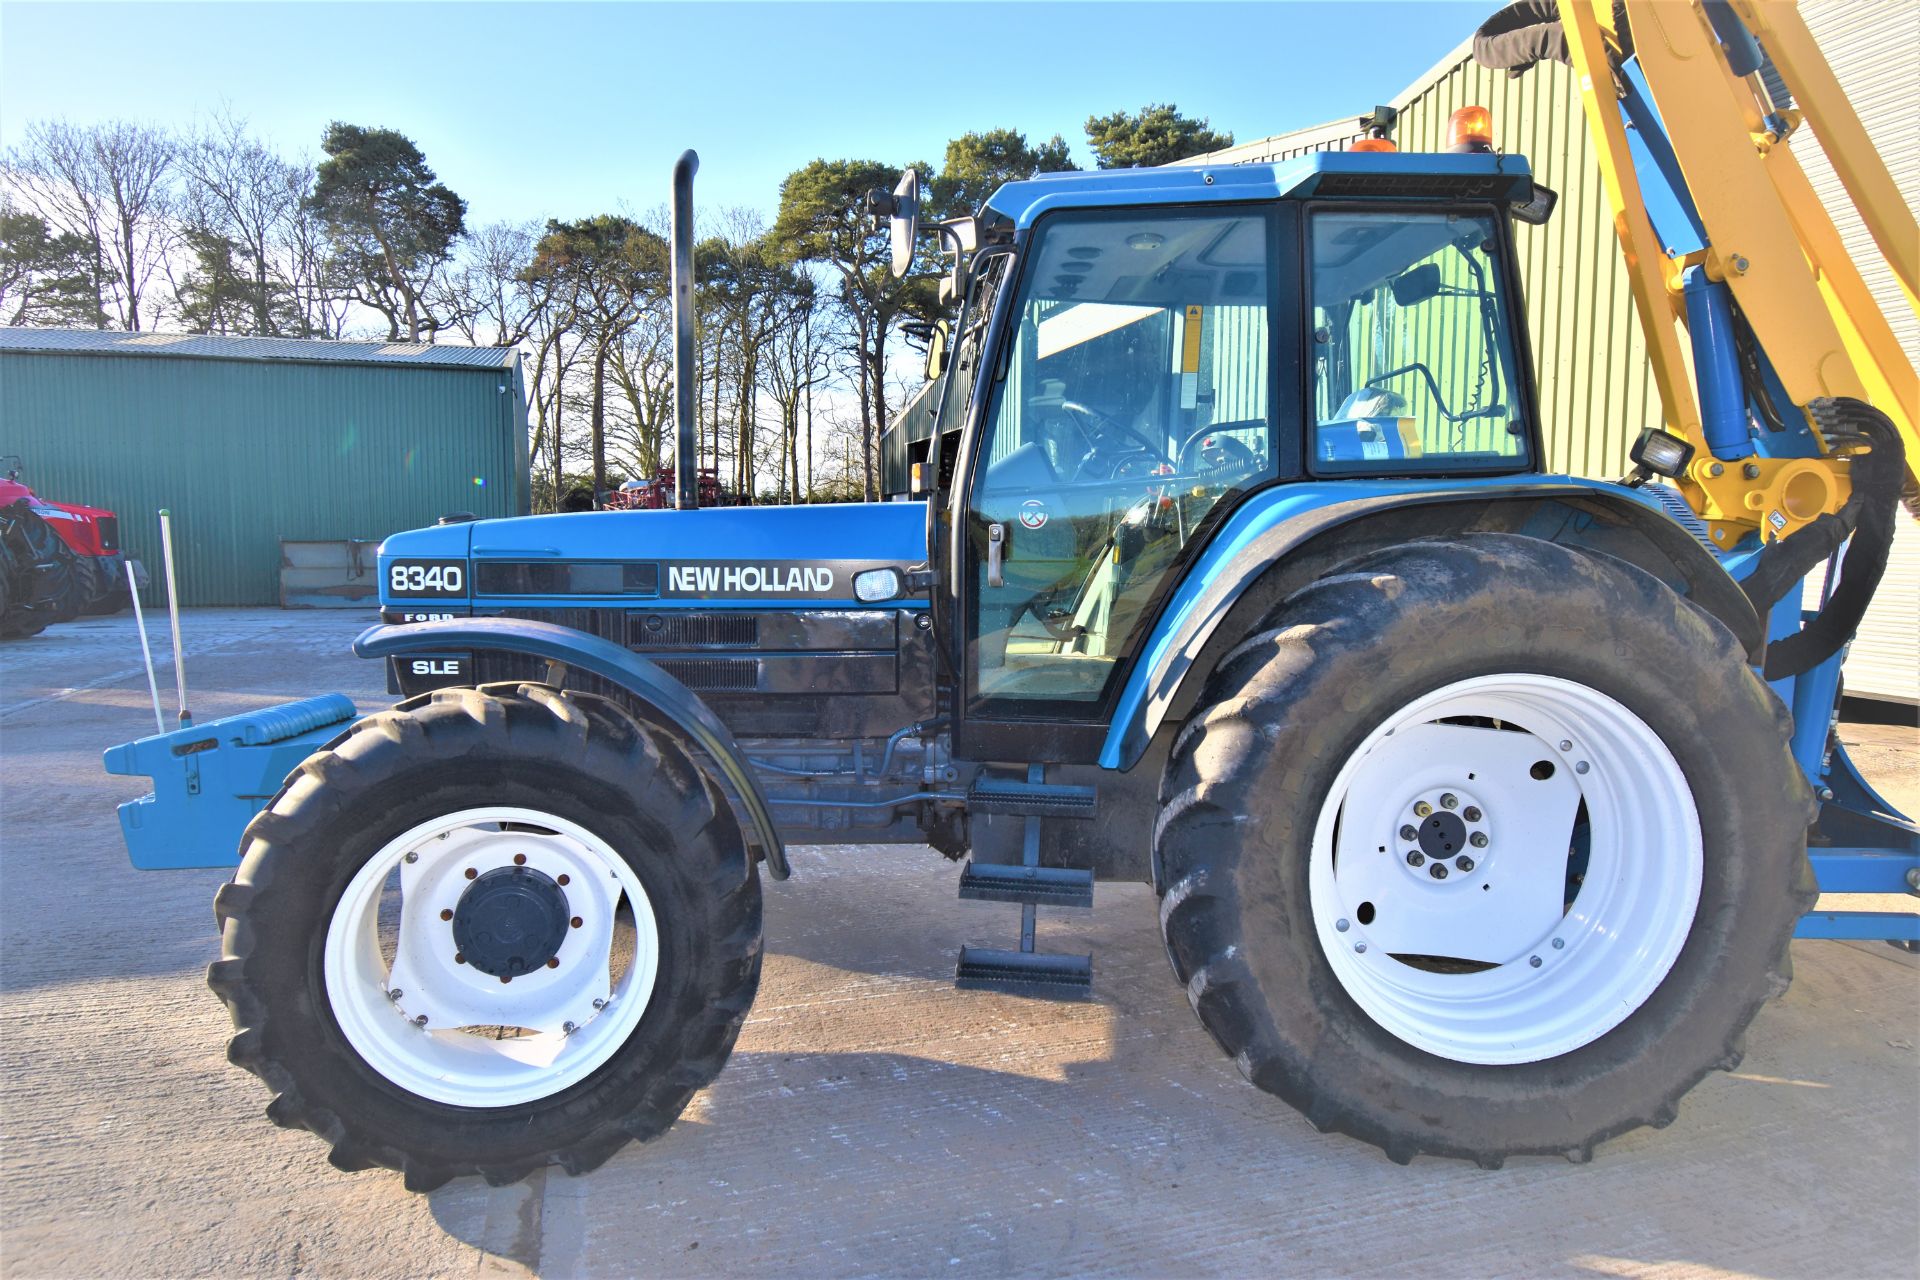 New-Holland / Ford 8340 sle - Image 5 of 12